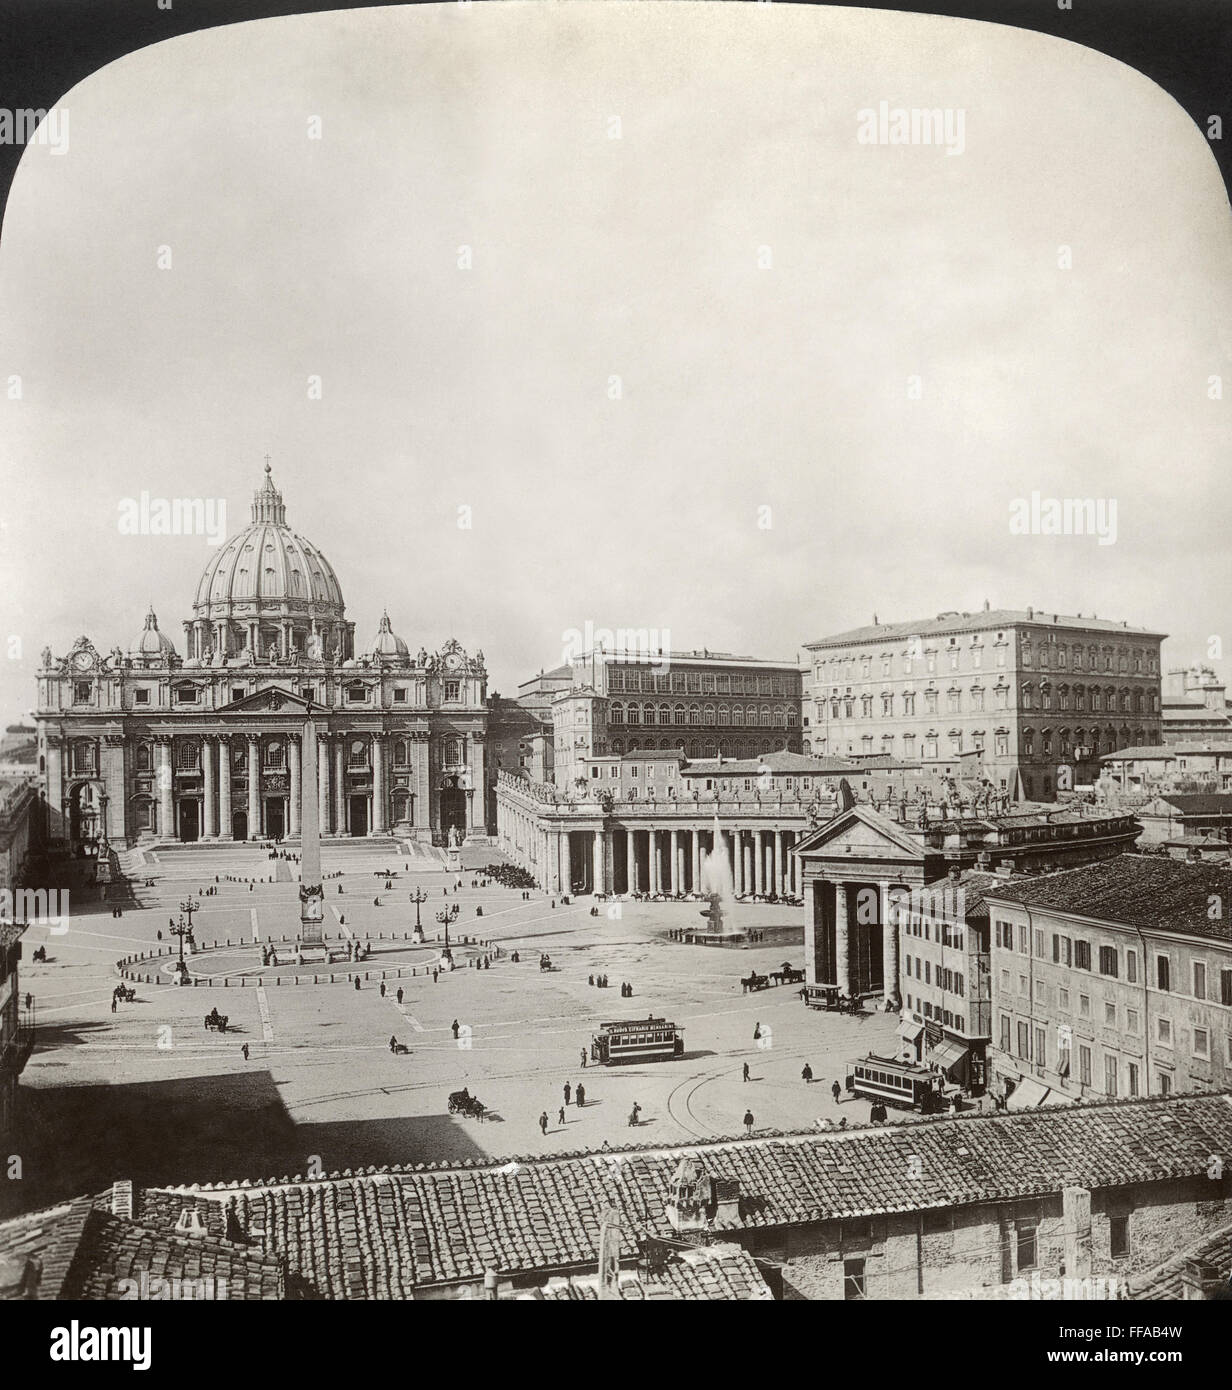 ST. PETER'S BASILICA. /nThe Vatican, Rome, Italy. Stereograph, 1908. Stock Photo